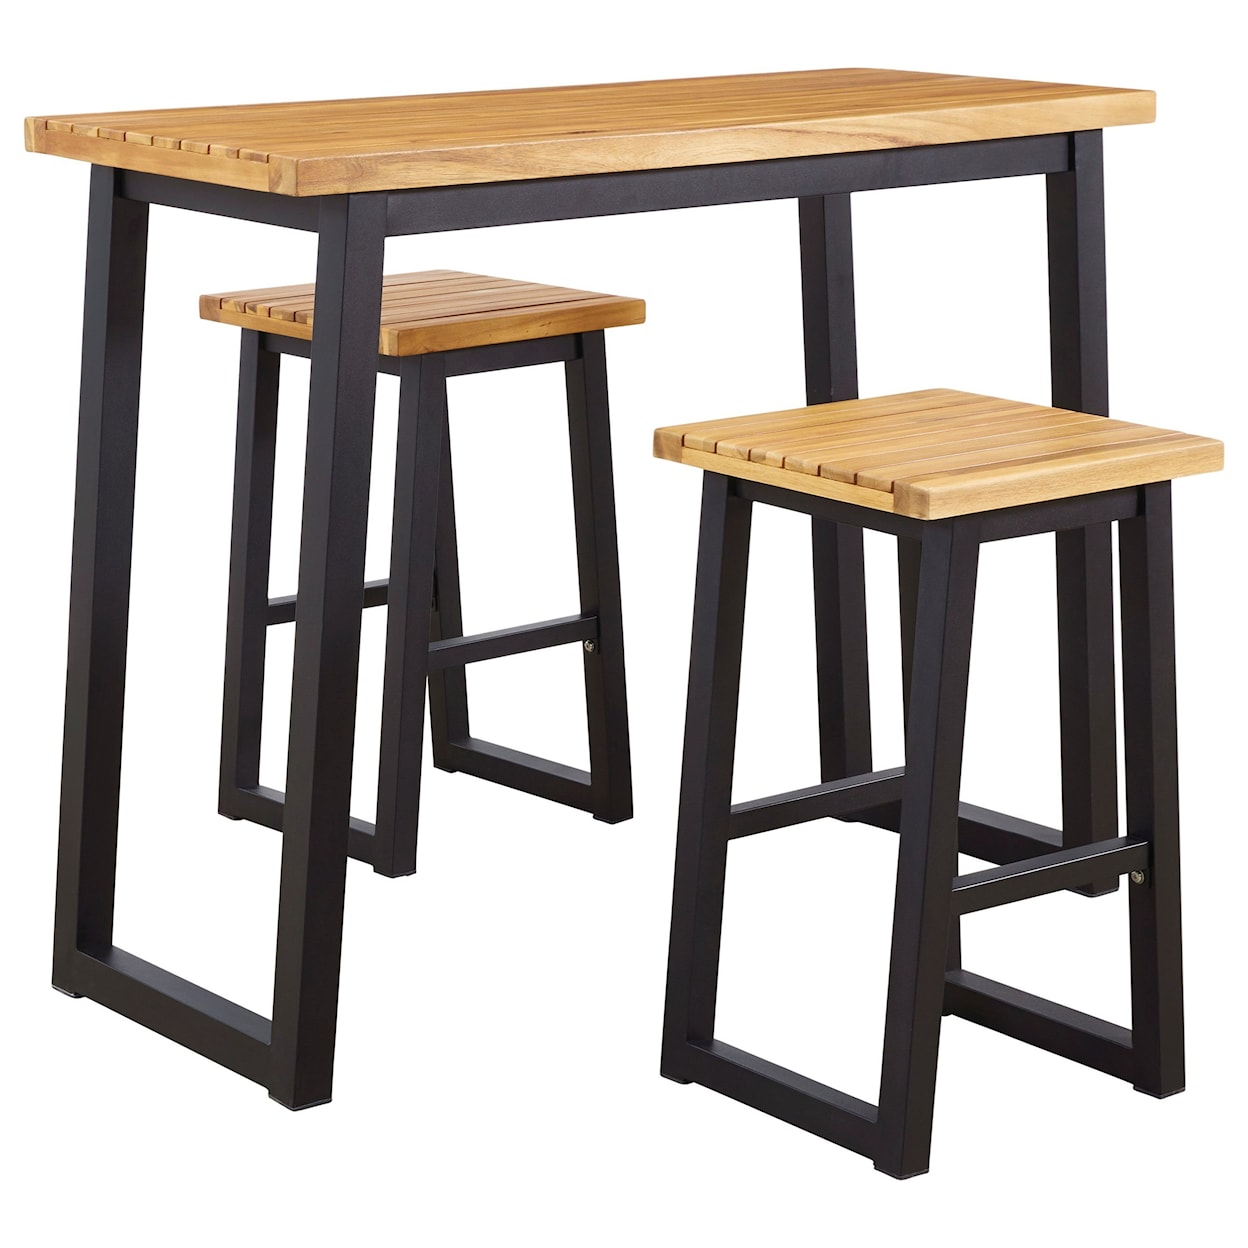 Signature Design by Ashley Town Wood 3-Piece Counter Table Set